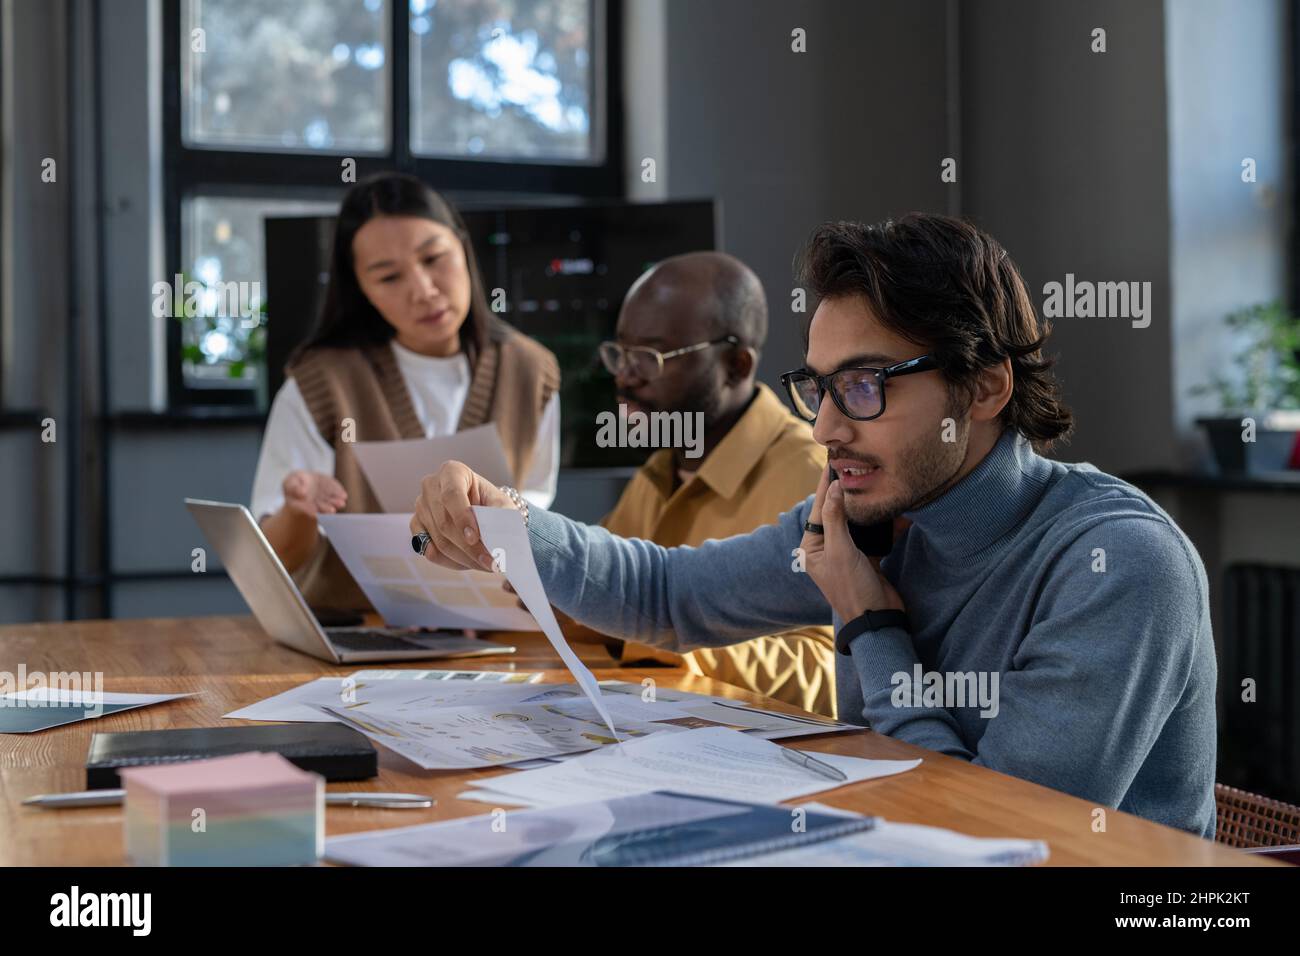 Young busy economist with mobile phone by ear looking through data in financial document against two colleagues discussing papers Stock Photo